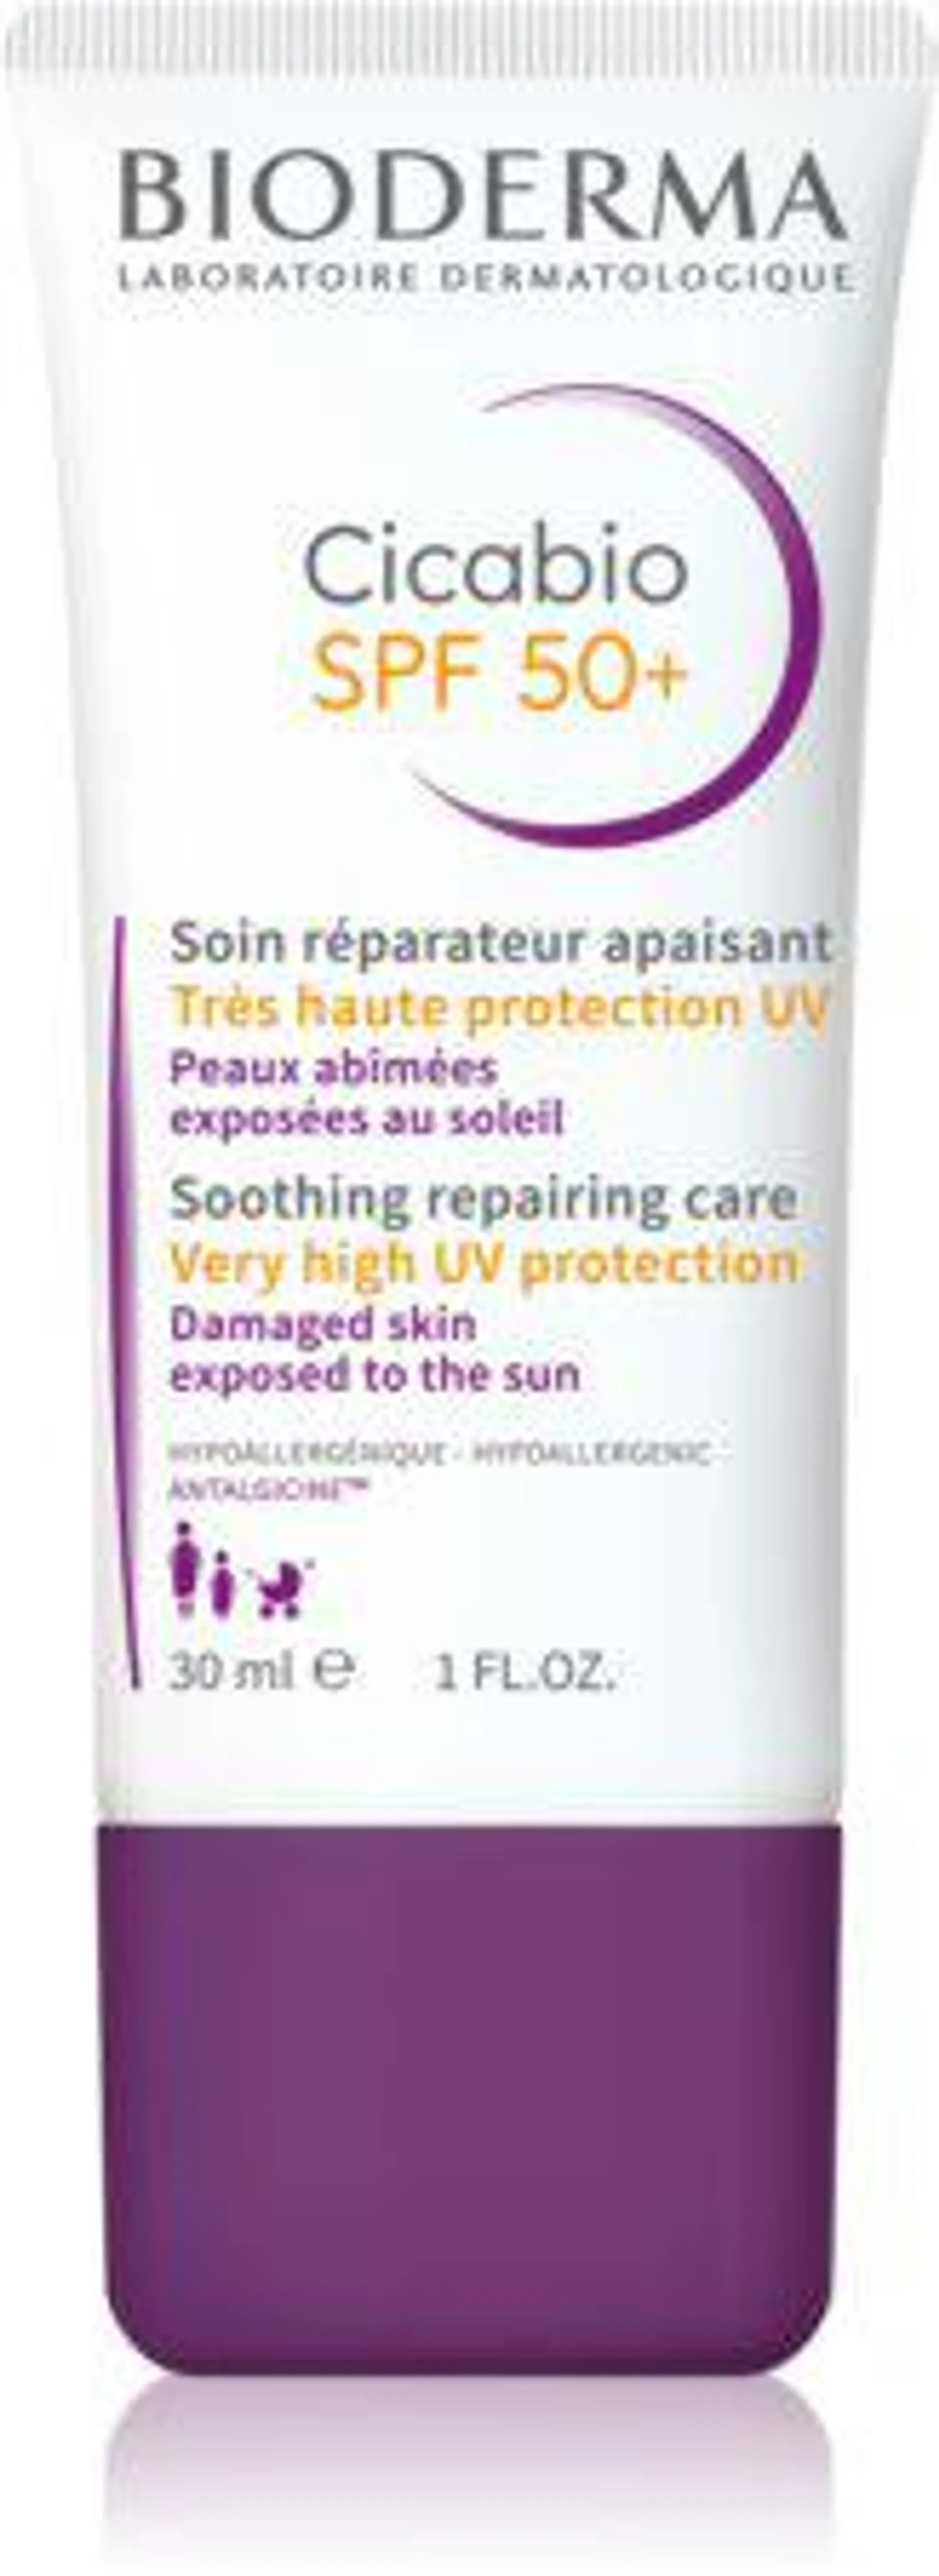 Soothing And Repairing Care SPF 50+